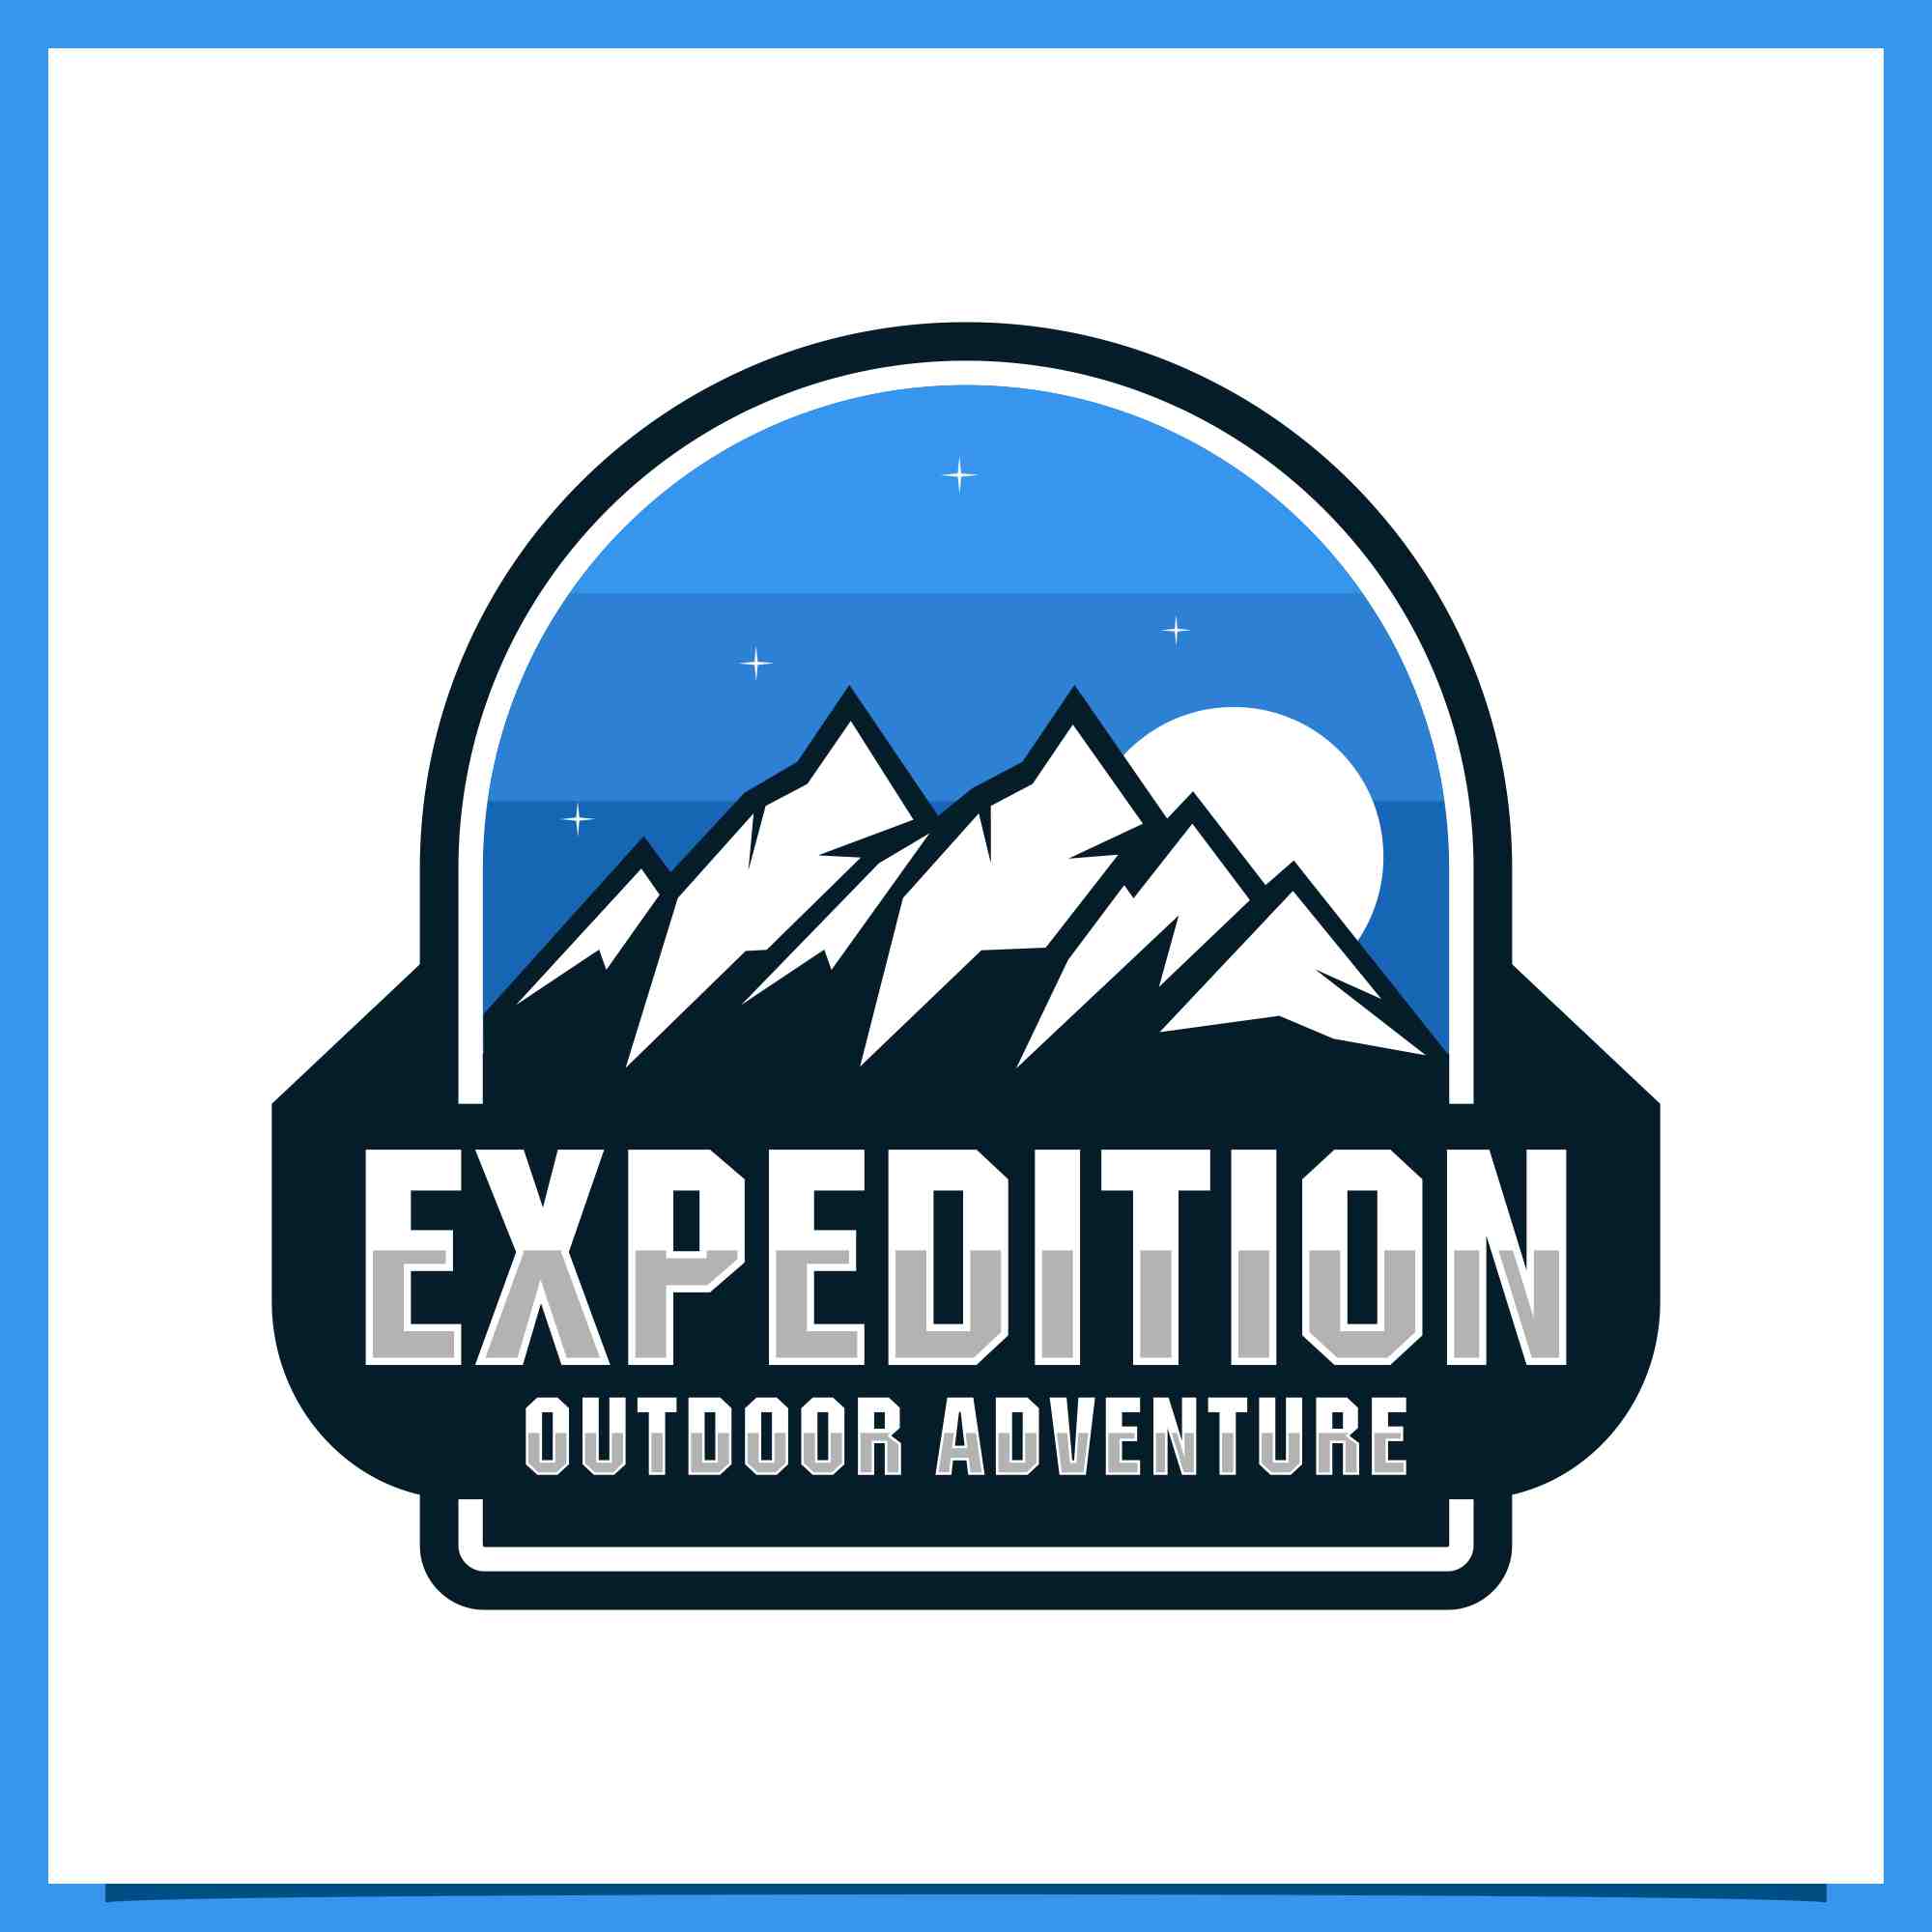 Set Expedition outdoor adventure badge design collection - $4 preview image.